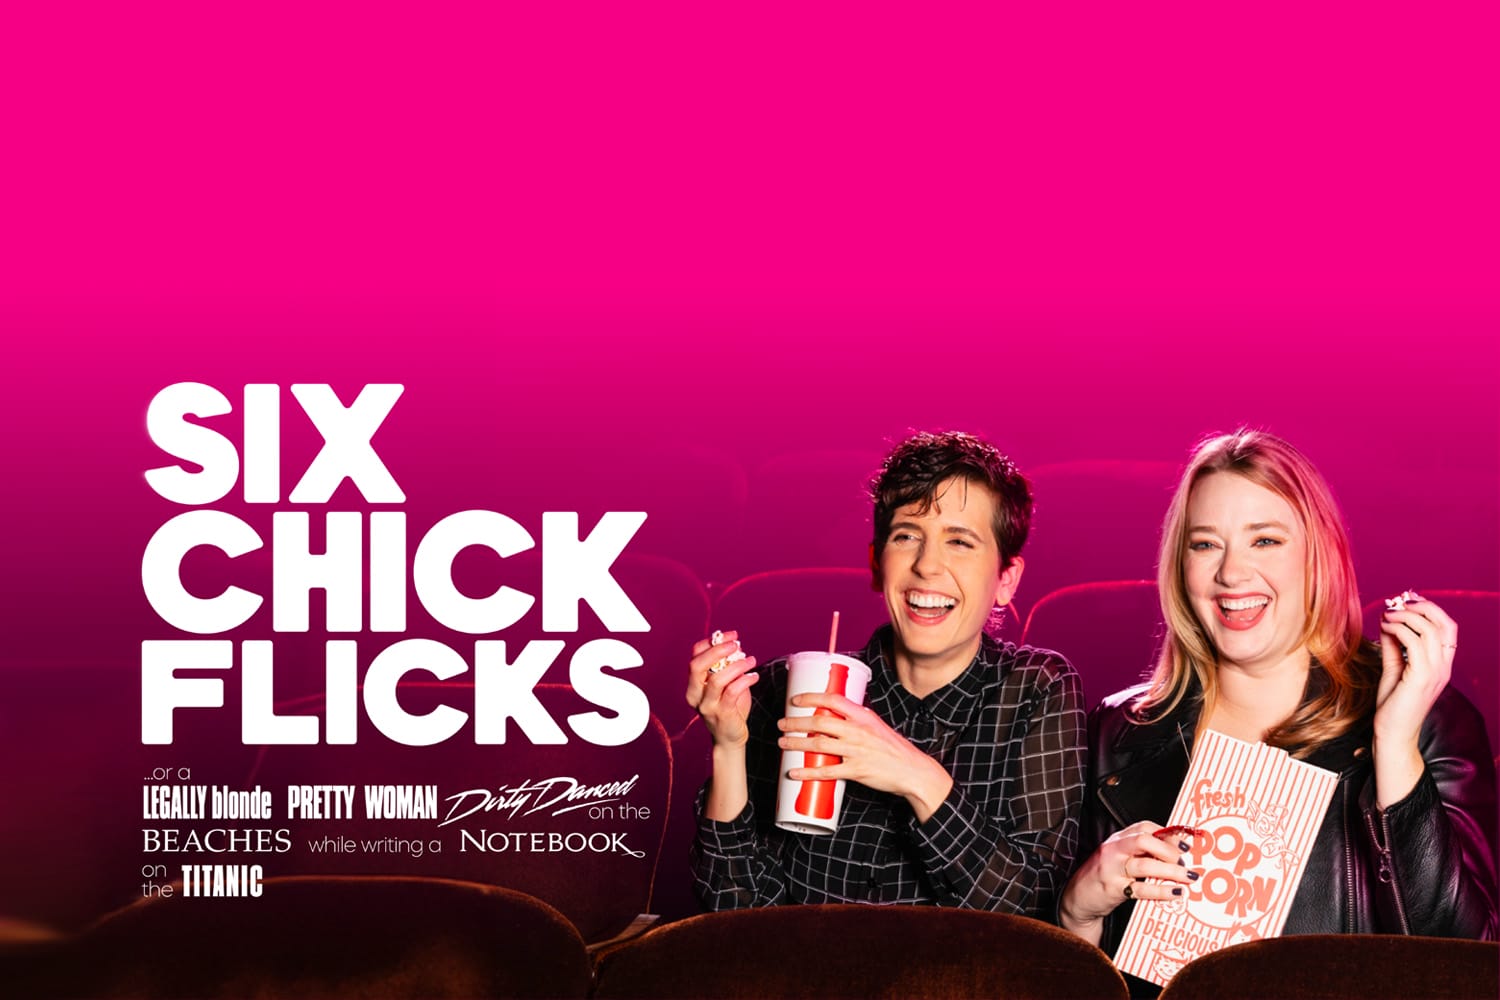 Two women in cinema seats smile, holding popcorn and soda. Behind them is a pink background. On the left of the image, typography reads SIX CHICK FLICKS.